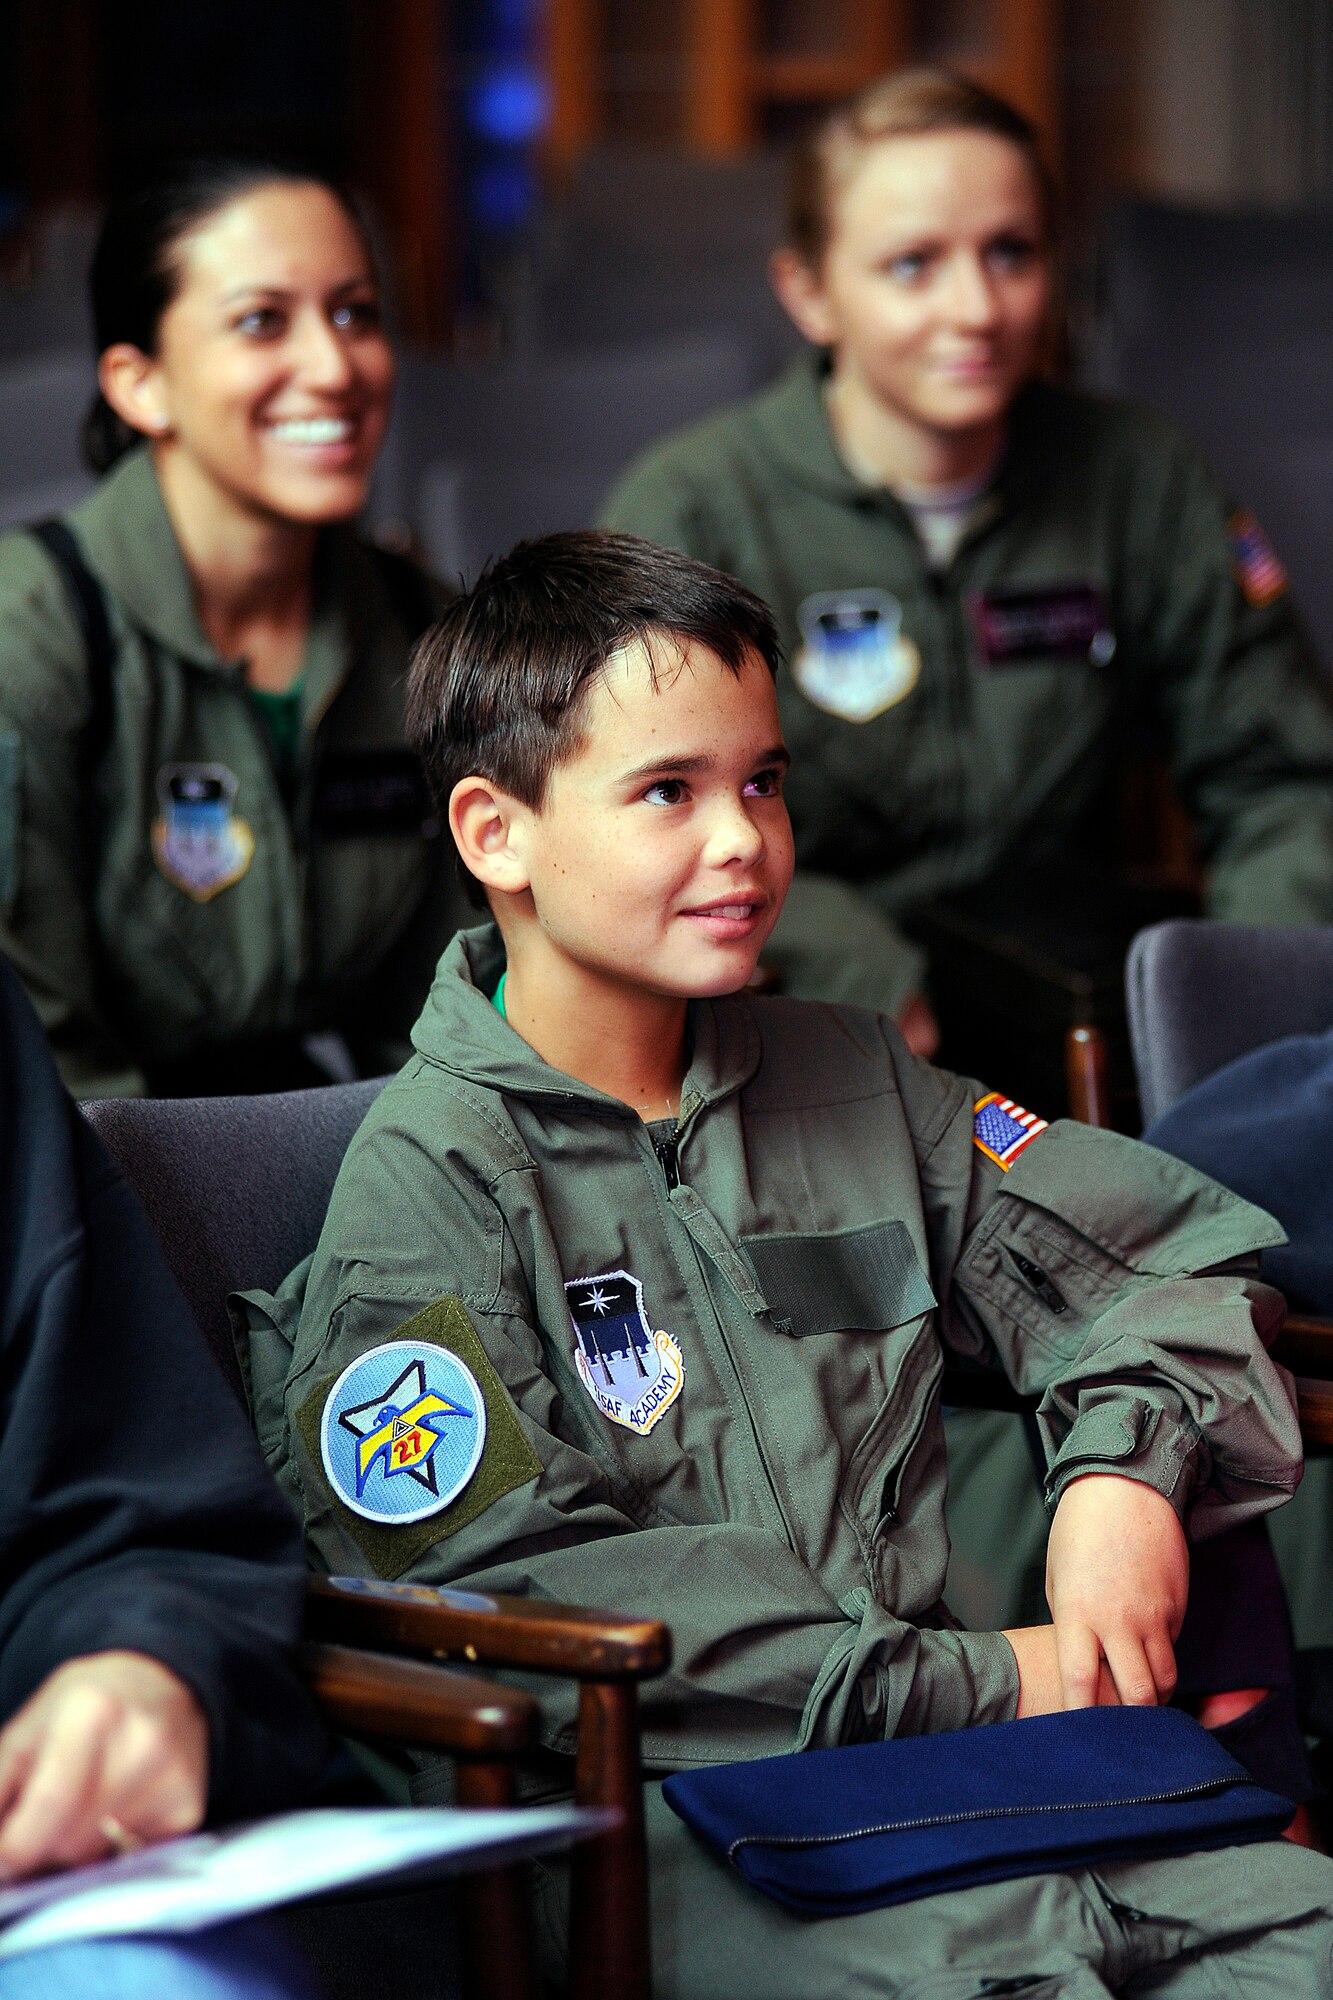 Wyatt Denton listens to a briefing during his visit to the Air Force Academy Sept. 28, 2012. Wyatt, a native of Parker, Colo., was made a cadet for a day through the Academy's partnership with the Make-a-Wish Foundation. (U.S. Air Force photo/Sarah Chambers)